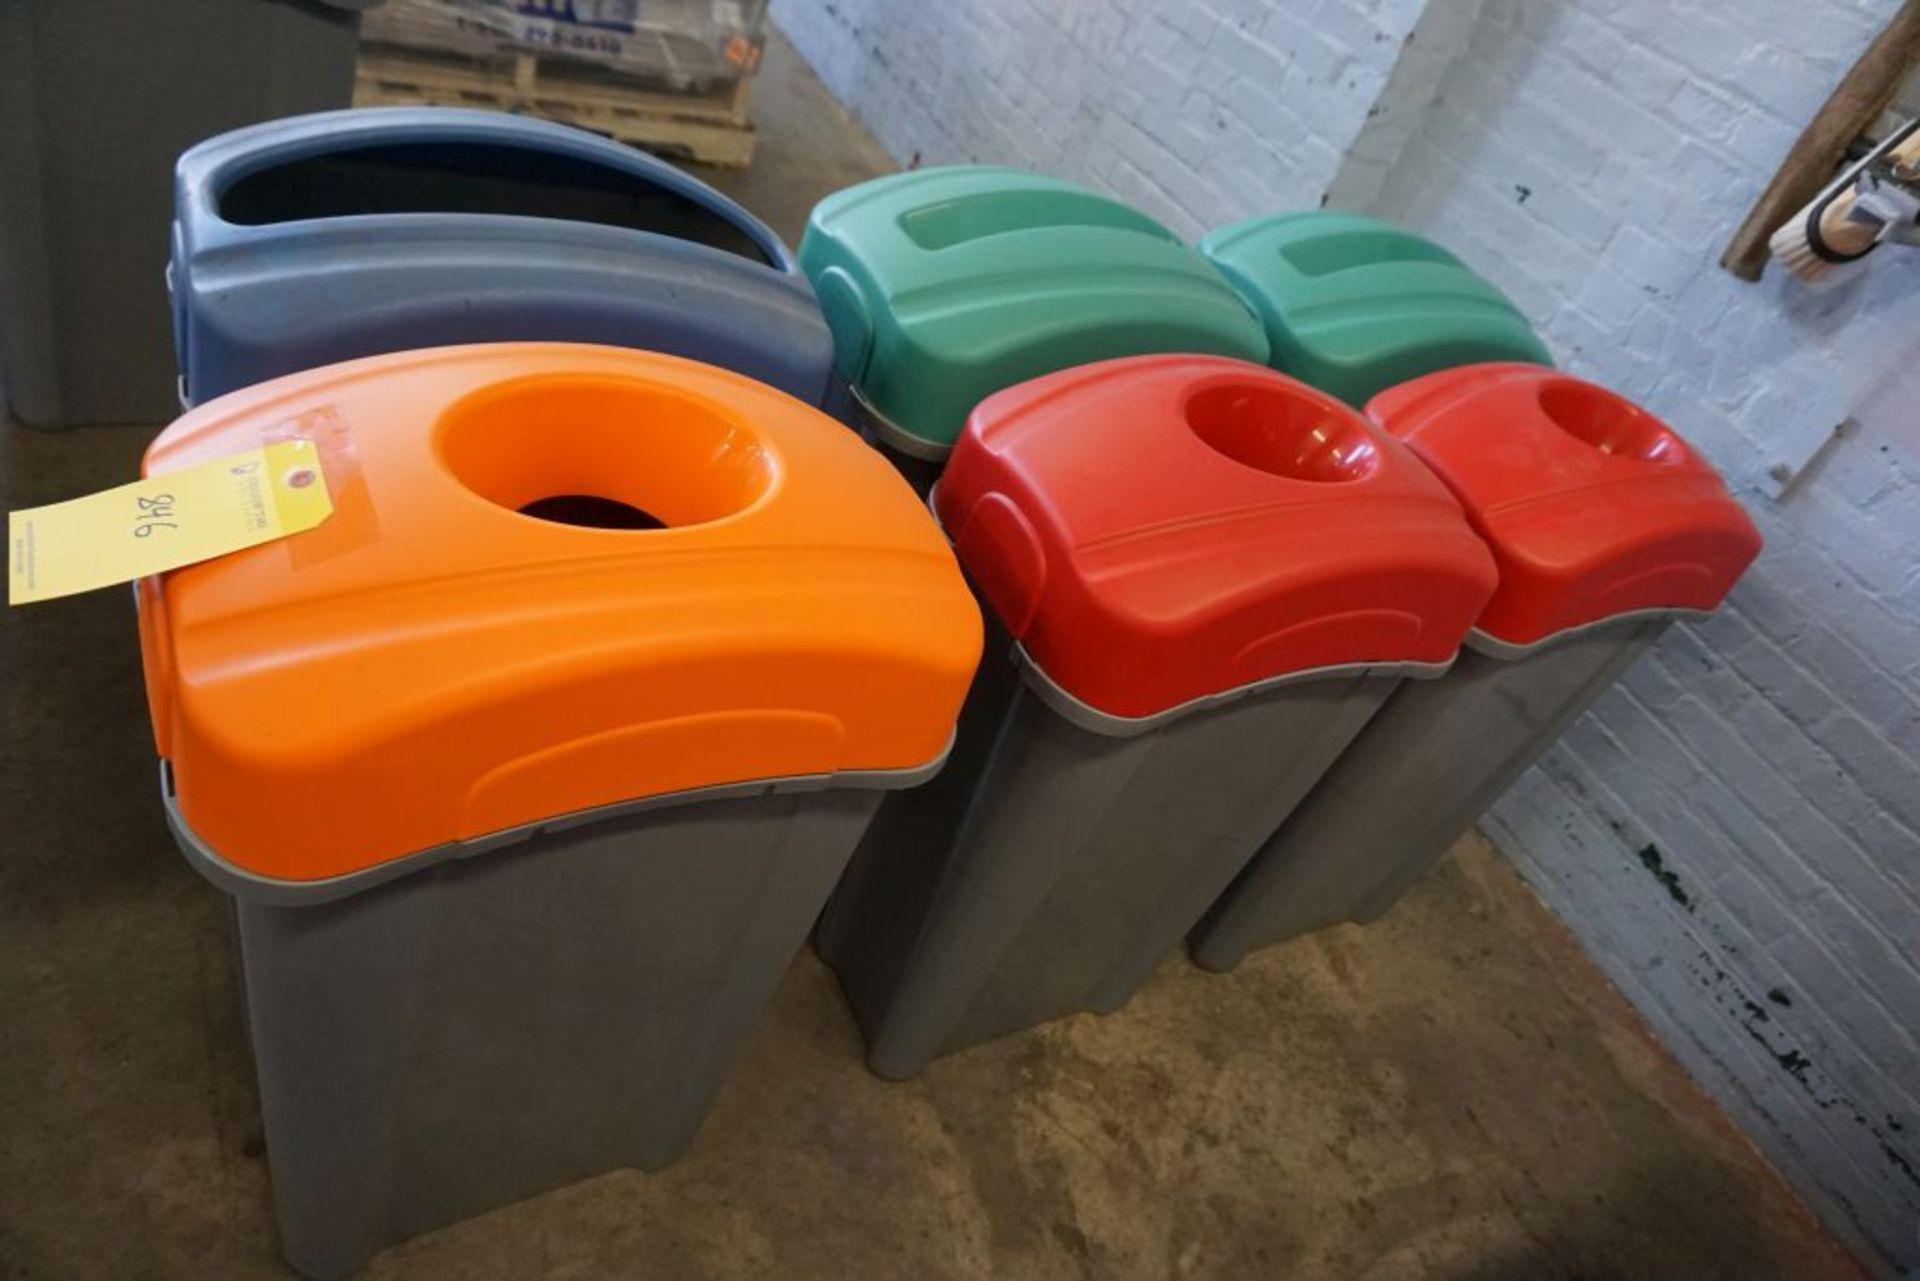 Lot of (6) Recycling/Waste Bins|Lot Tag: 846 - Image 2 of 3